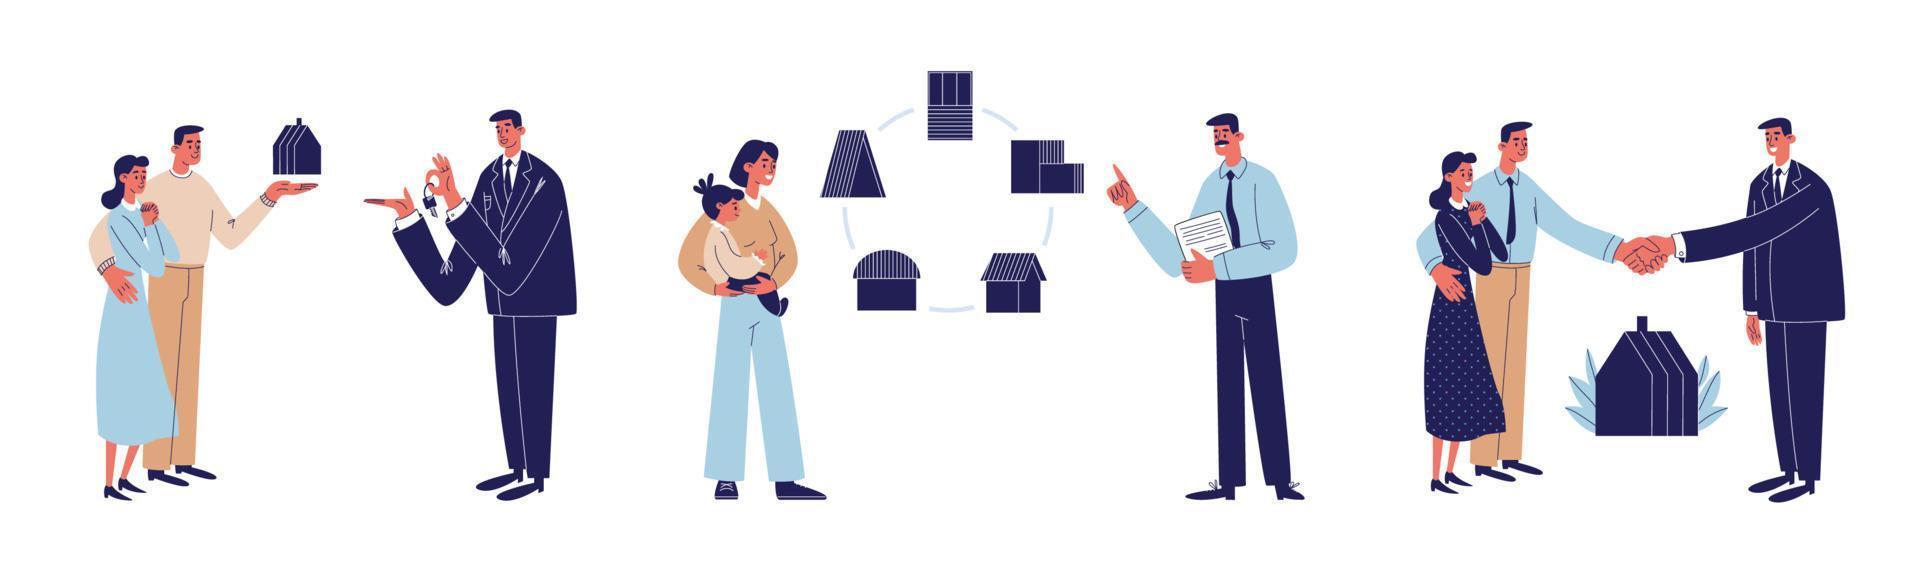 Sale, rental of housing. The realtor gives the keys to the young family, helps the single mother with the choice of the future home, makes a deal. Vector illustration isolated on a white background.